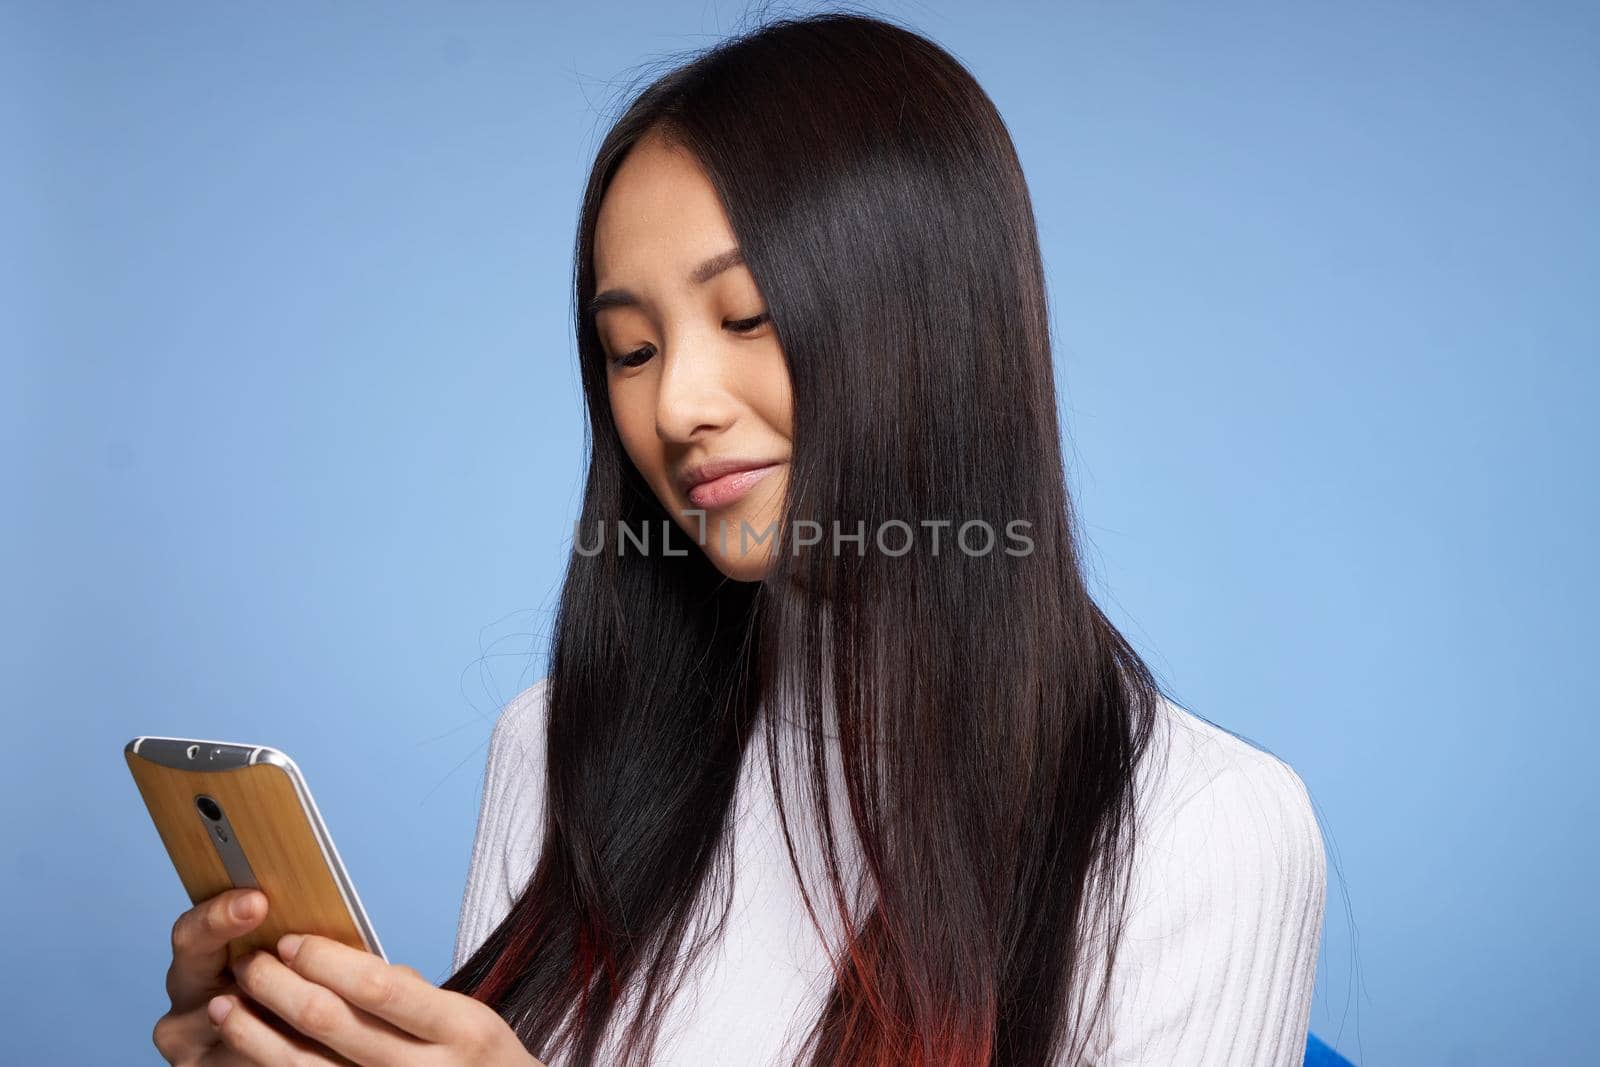 woman asian appearance phone hands communication technology lifestyle blue background. High quality photo